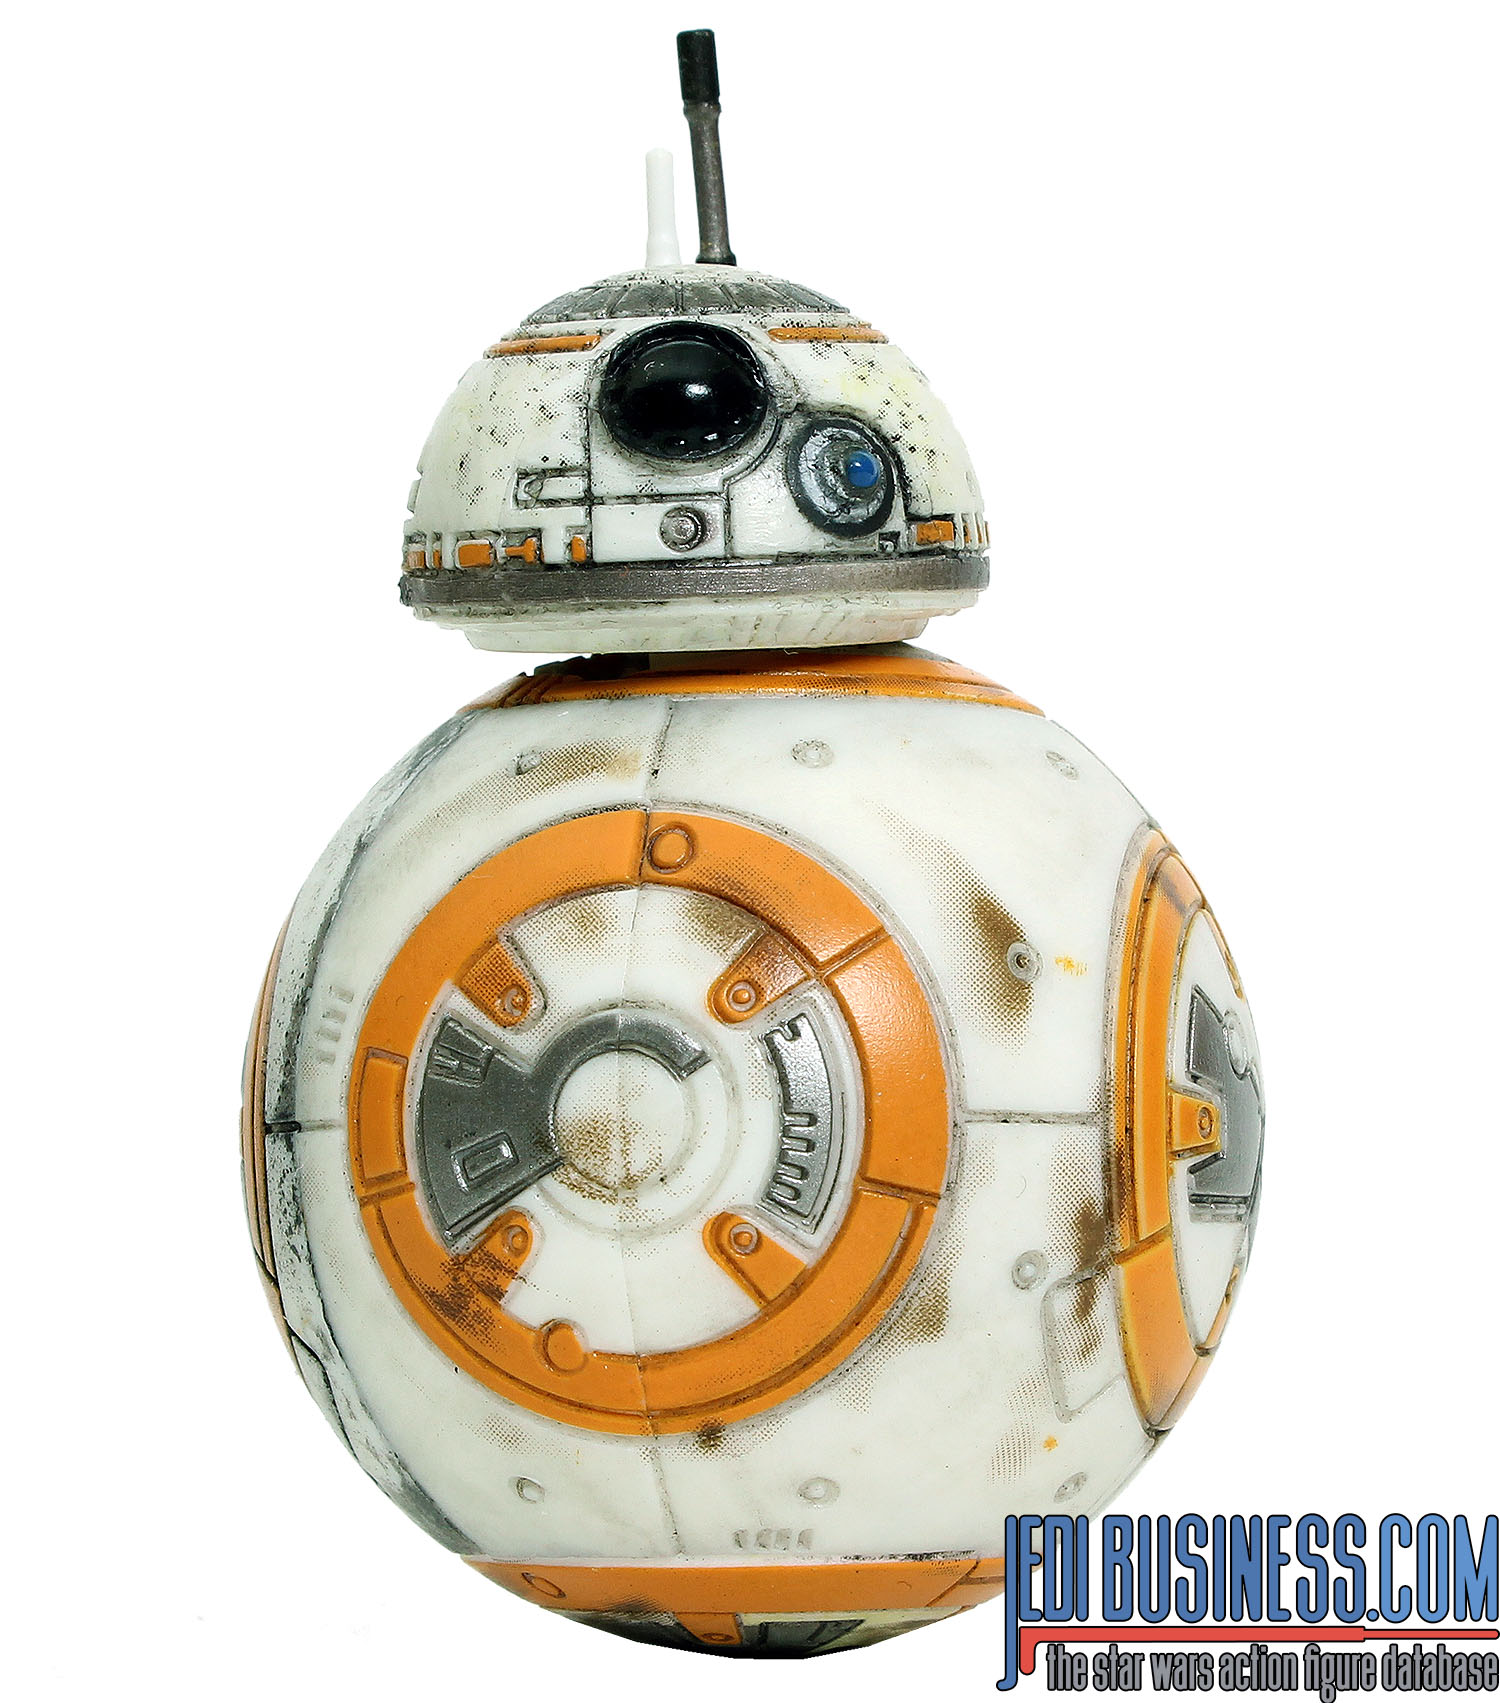 BB-8 Droid Depot 4-Pack